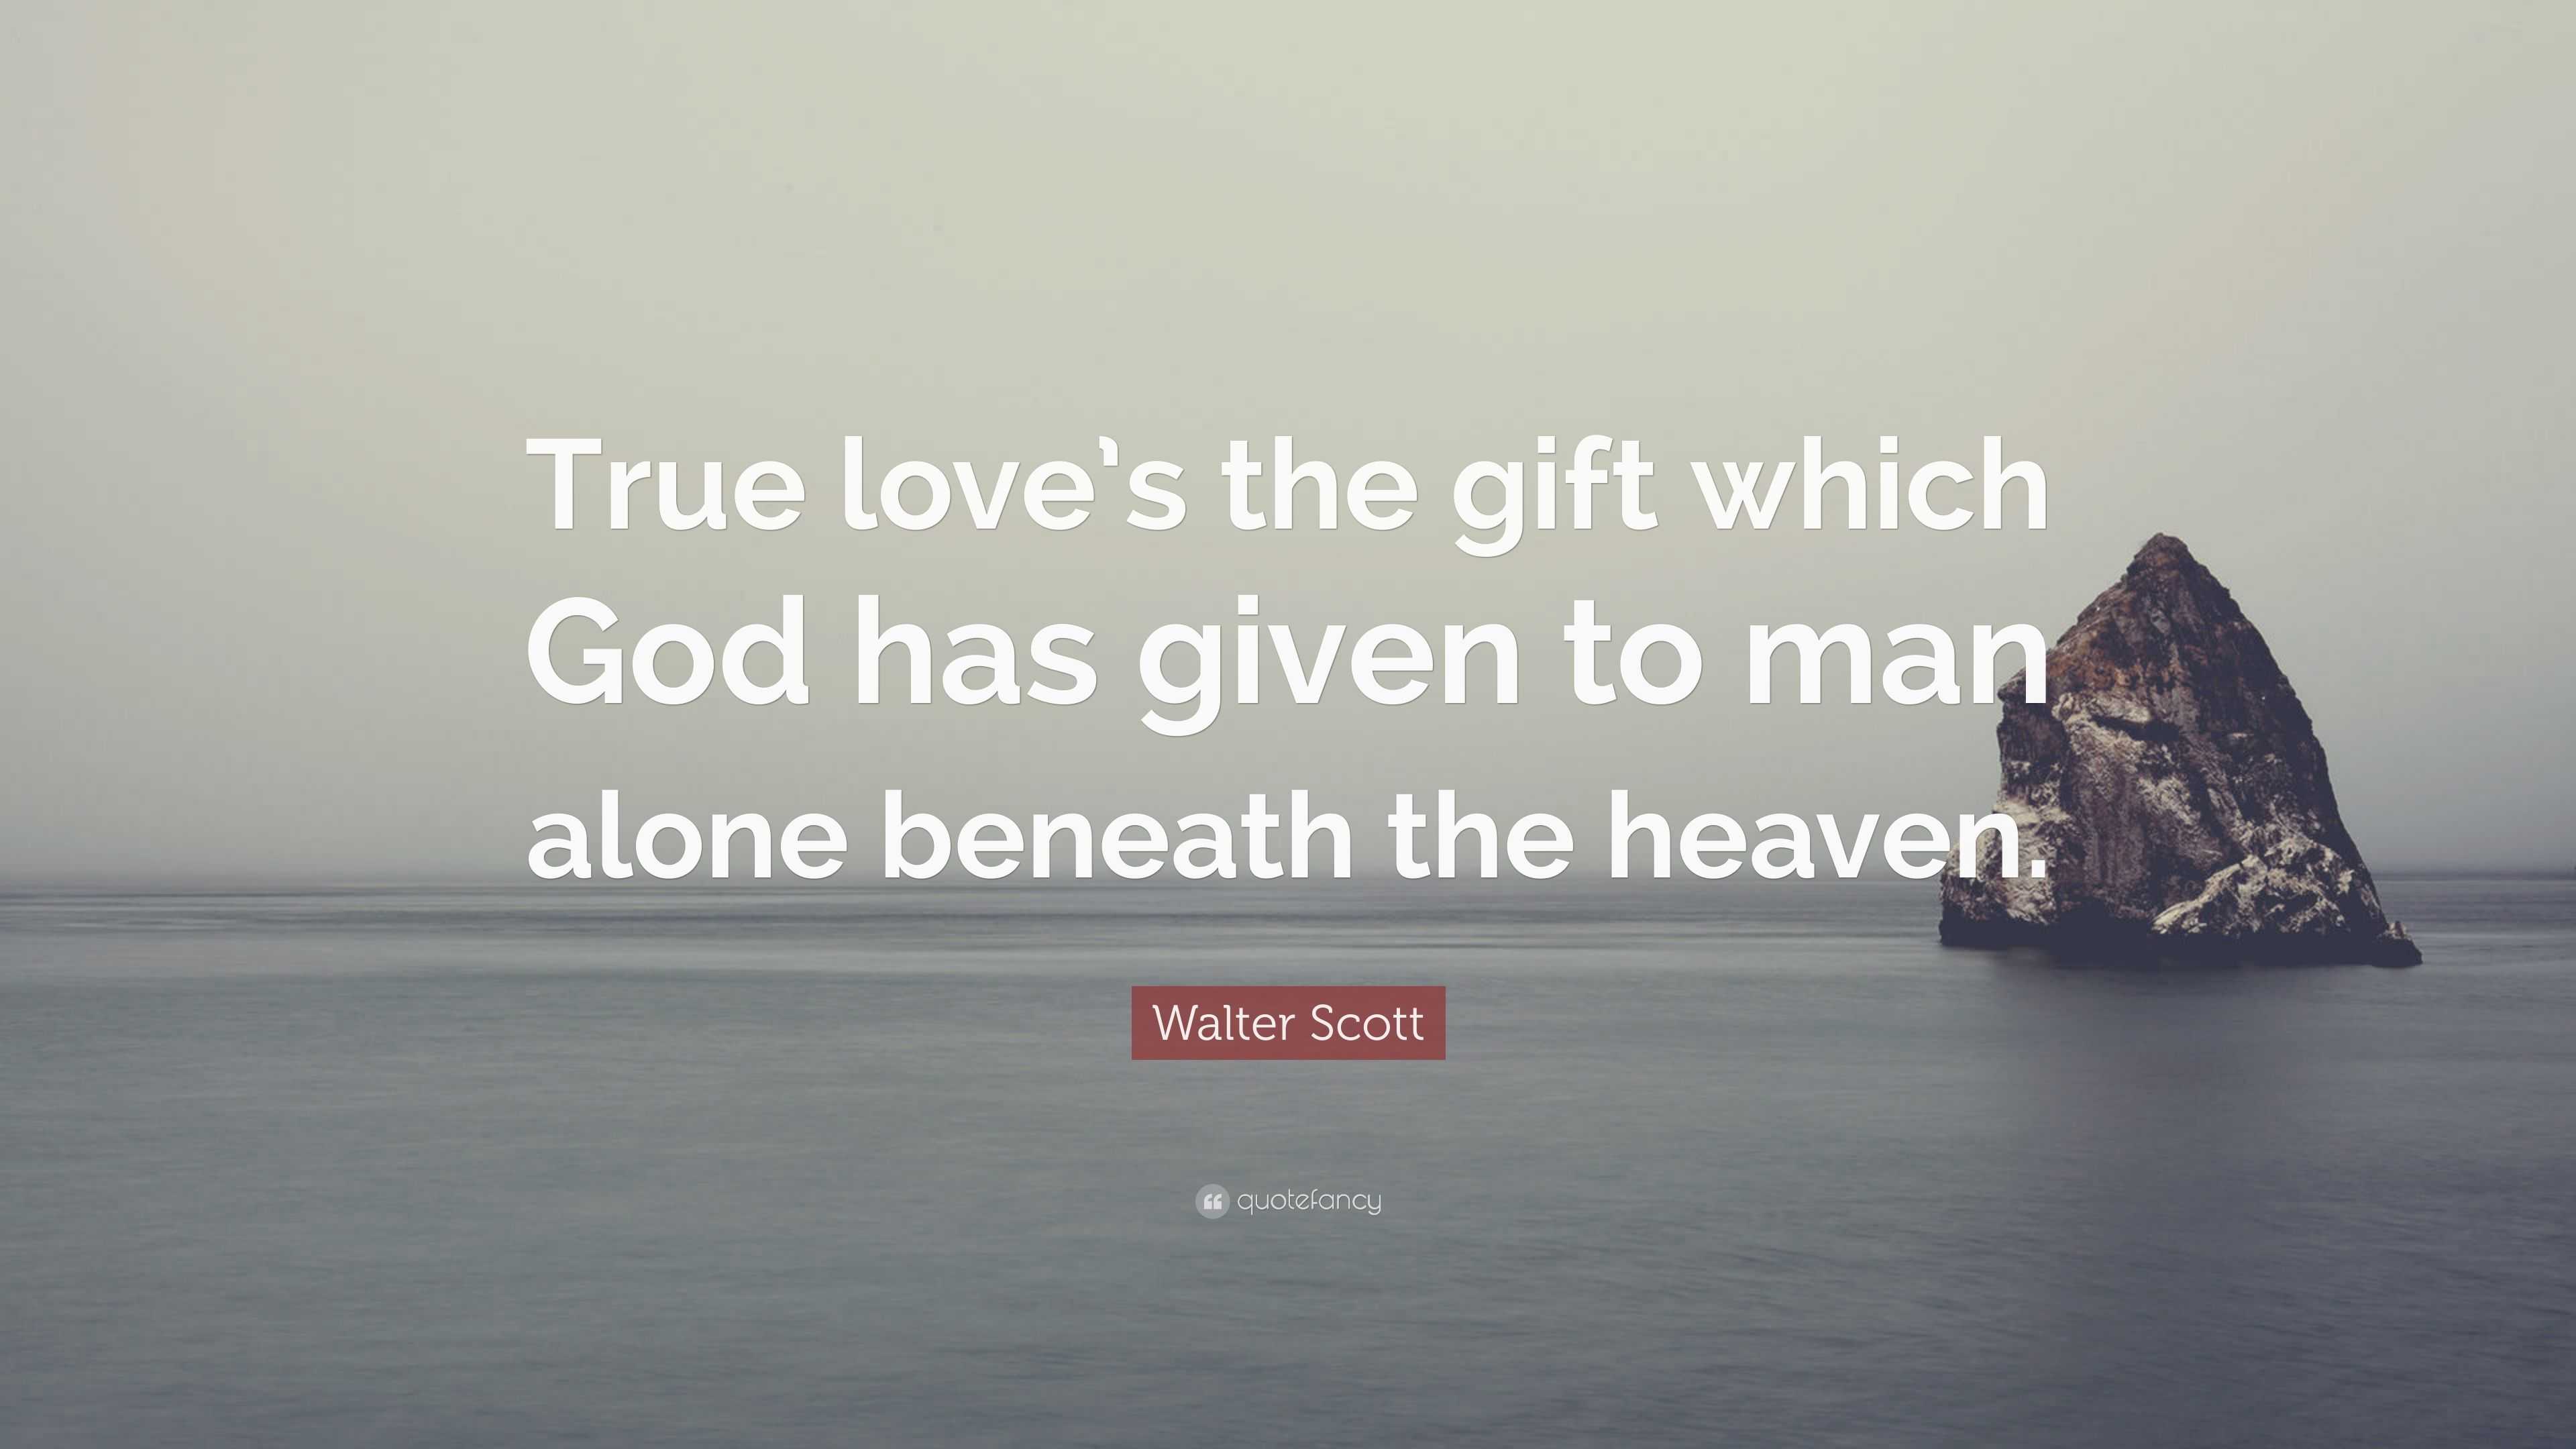 Walter Scott Quote “True love s the t which God has given to man alone